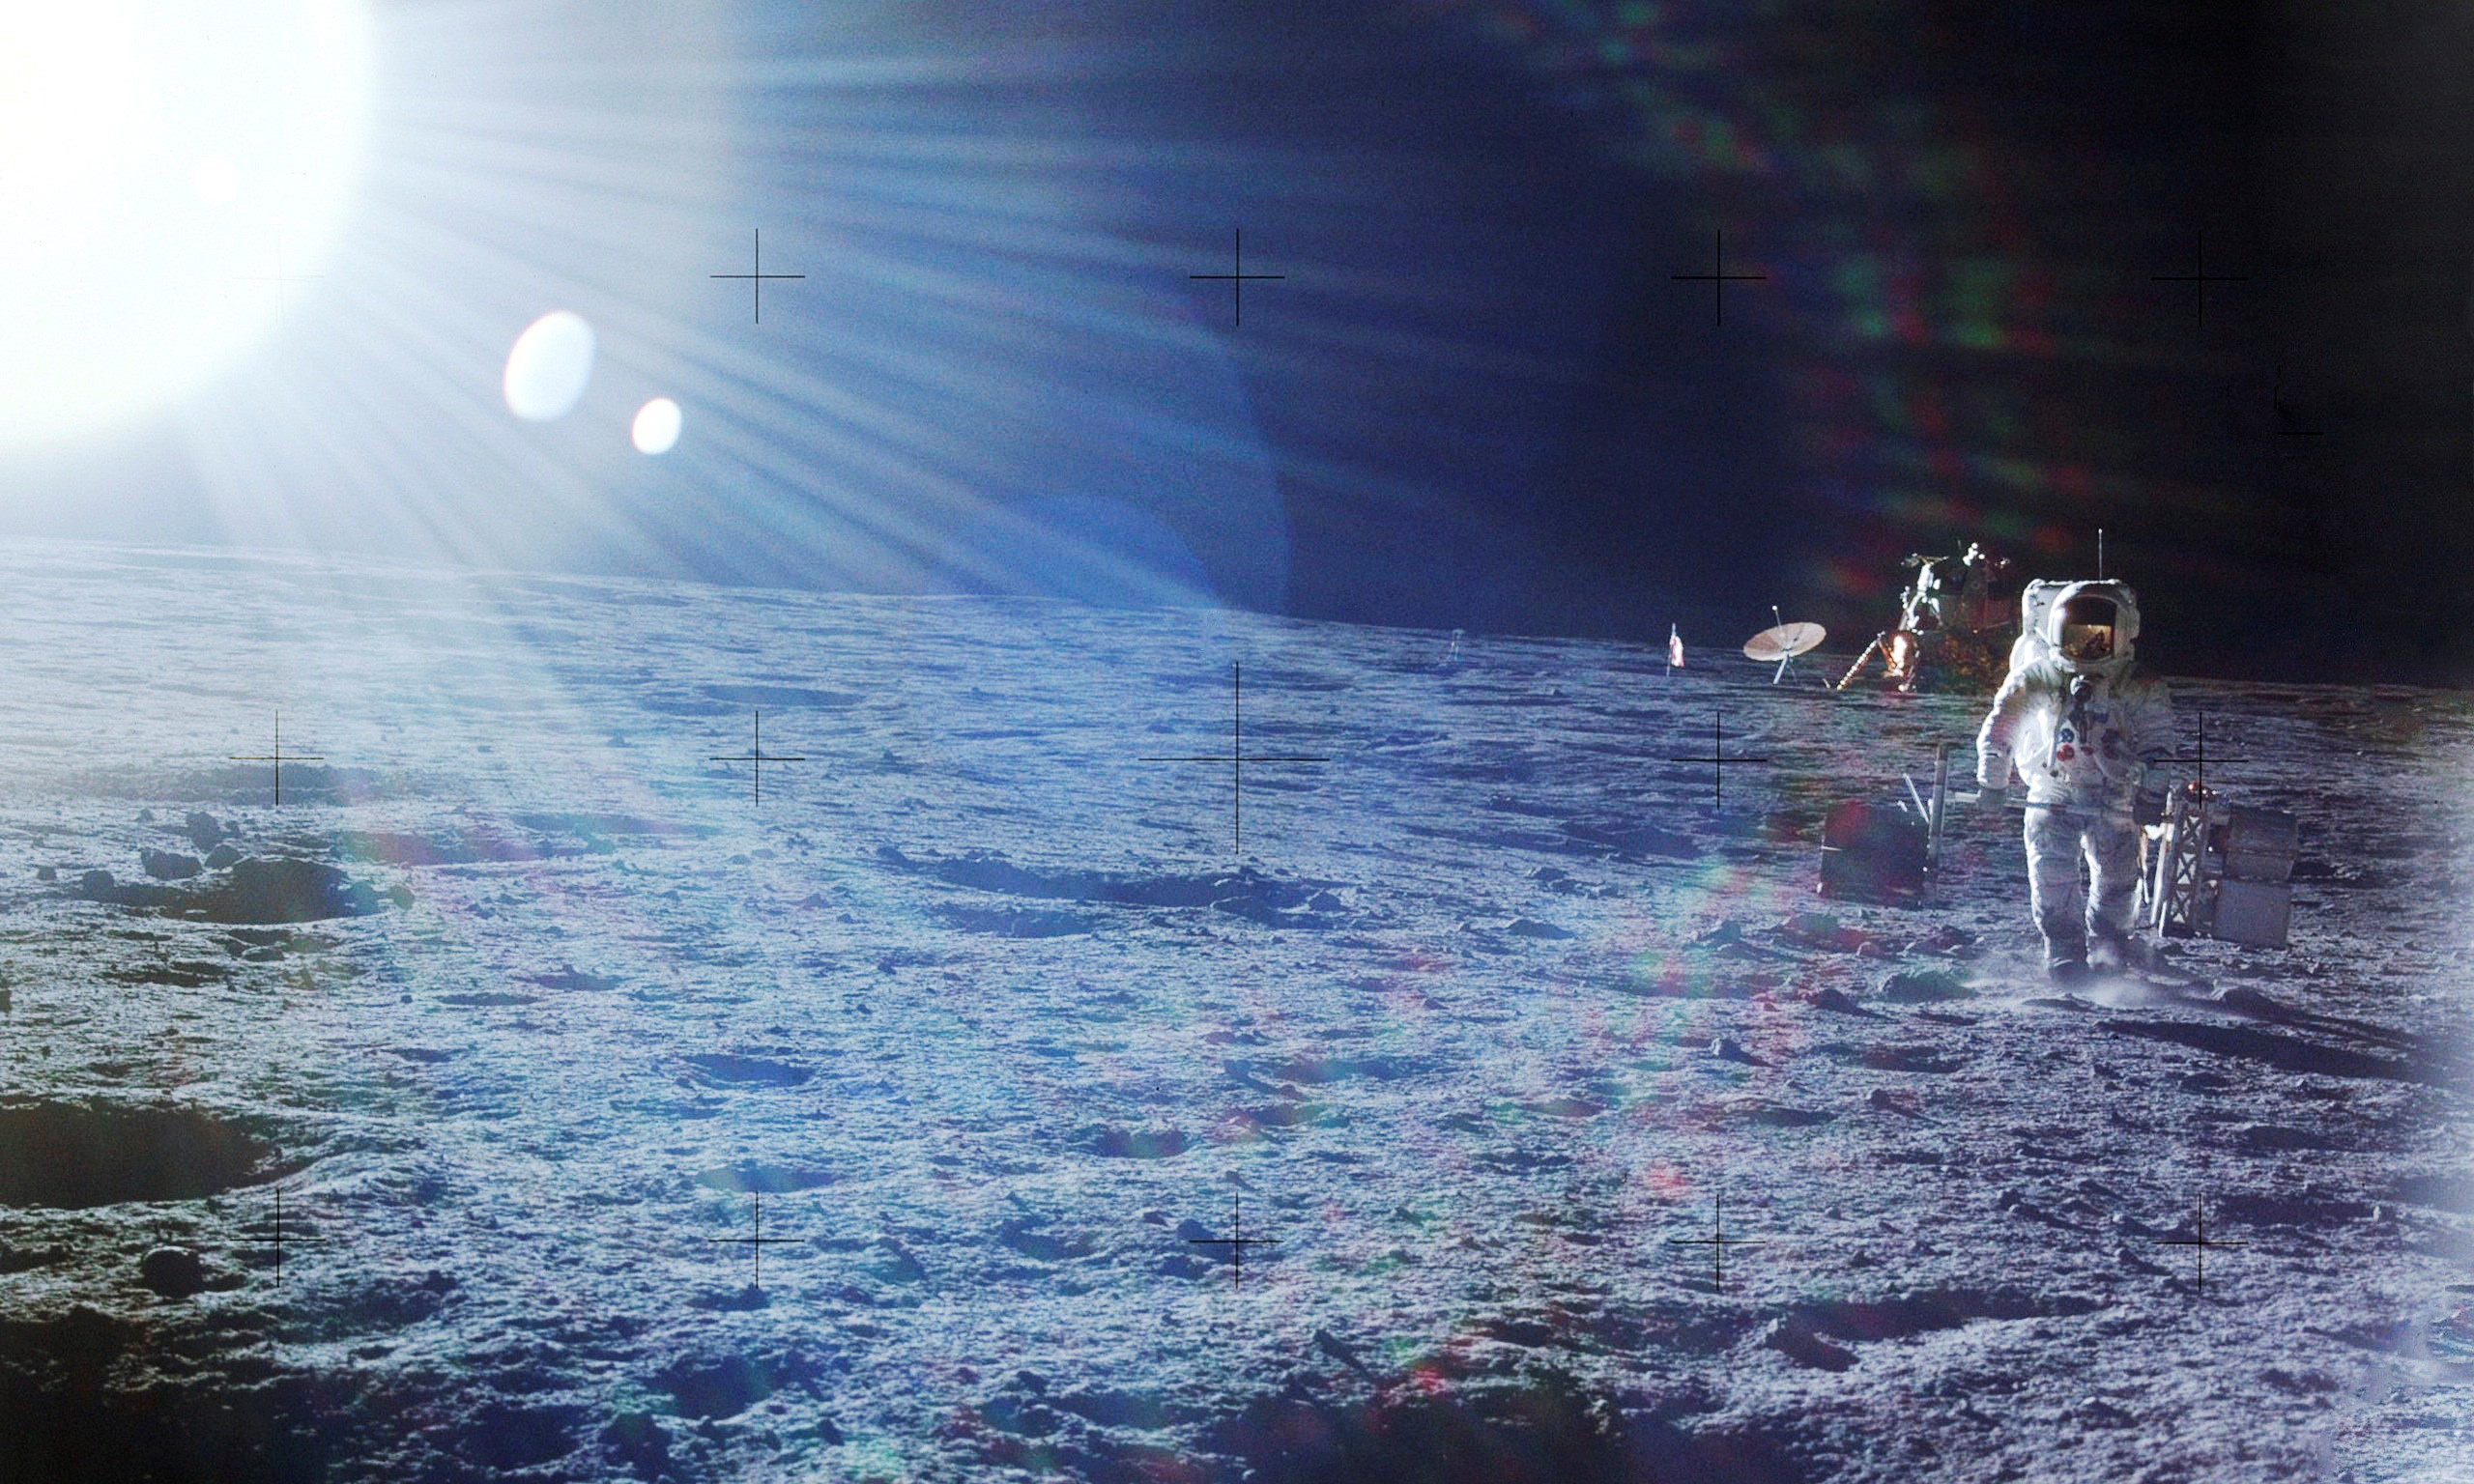 slide 3 - An astronaut is carrying equipment on the Moon. The image is light by a bright sunburst and lens flare that give it an unearthly feel.